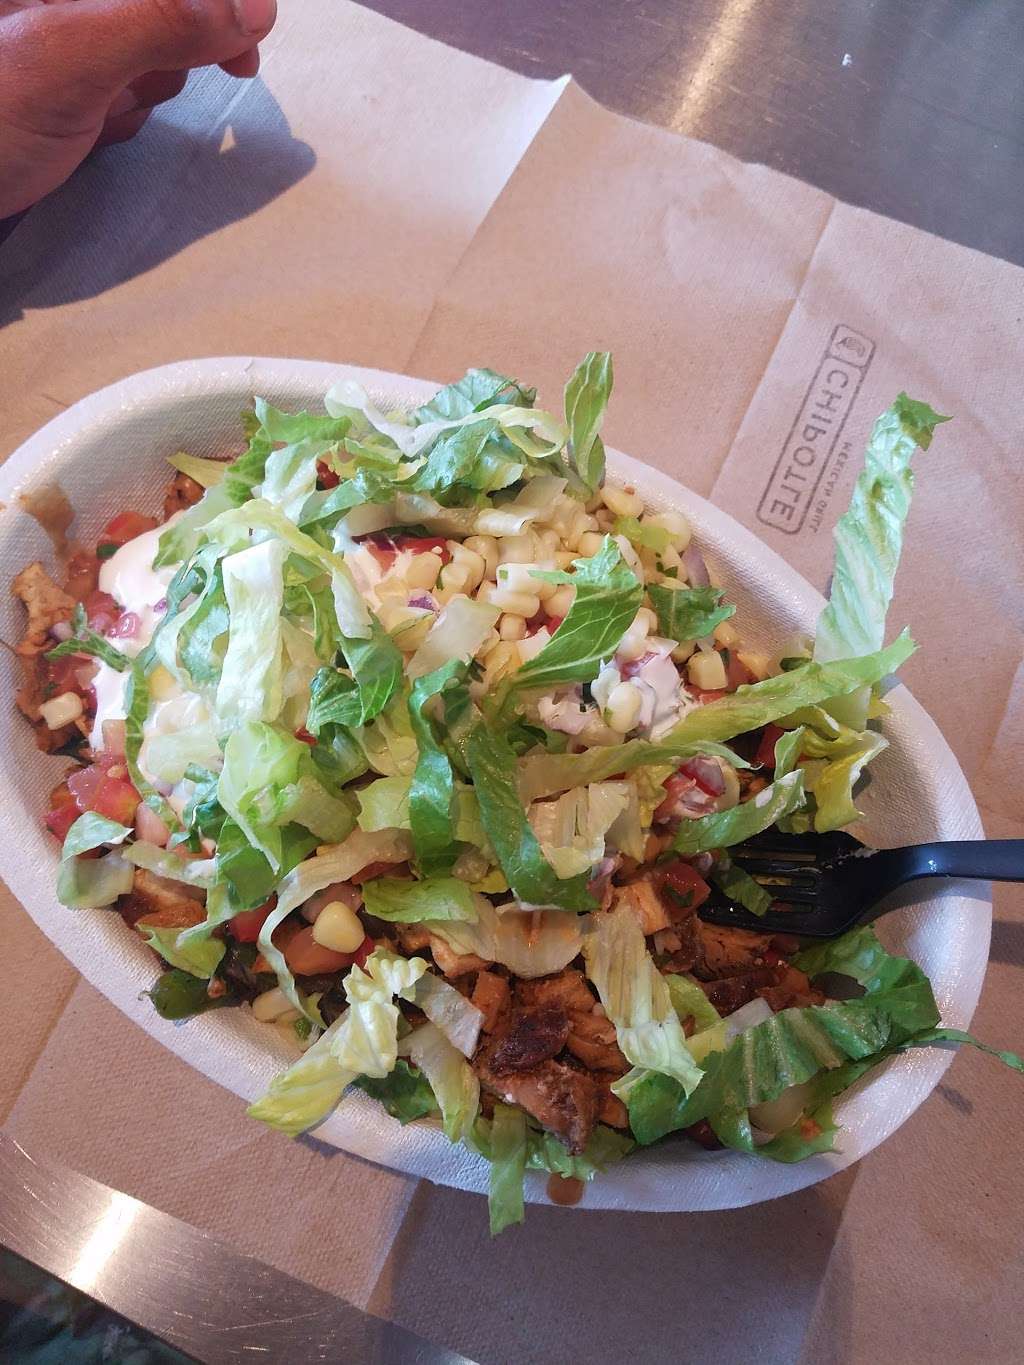 Chipotle Mexican Grill | 7173 Kingery Hwy, Willowbrook, IL 60527 | Phone: (630) 560-7900